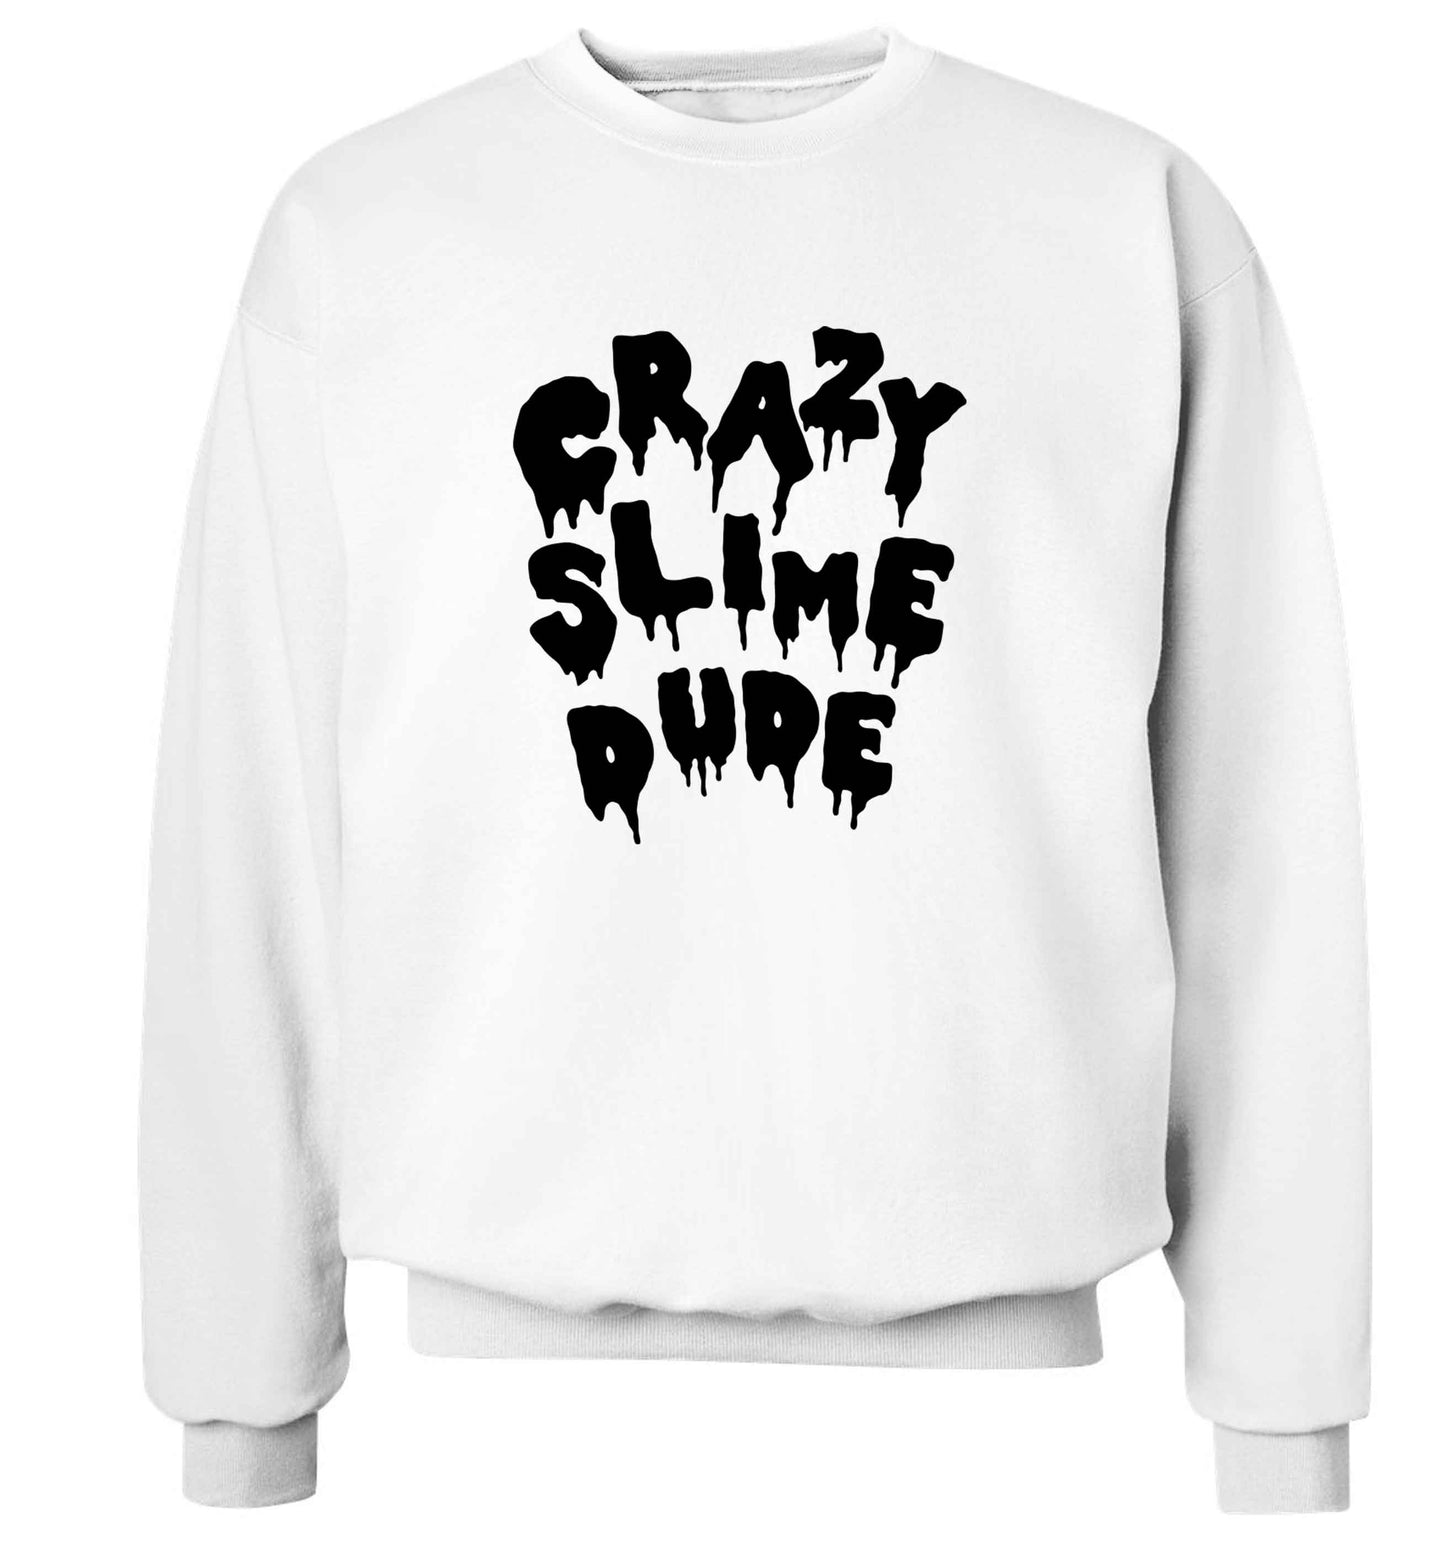 Crazy slime dude adult's unisex white sweater 2XL